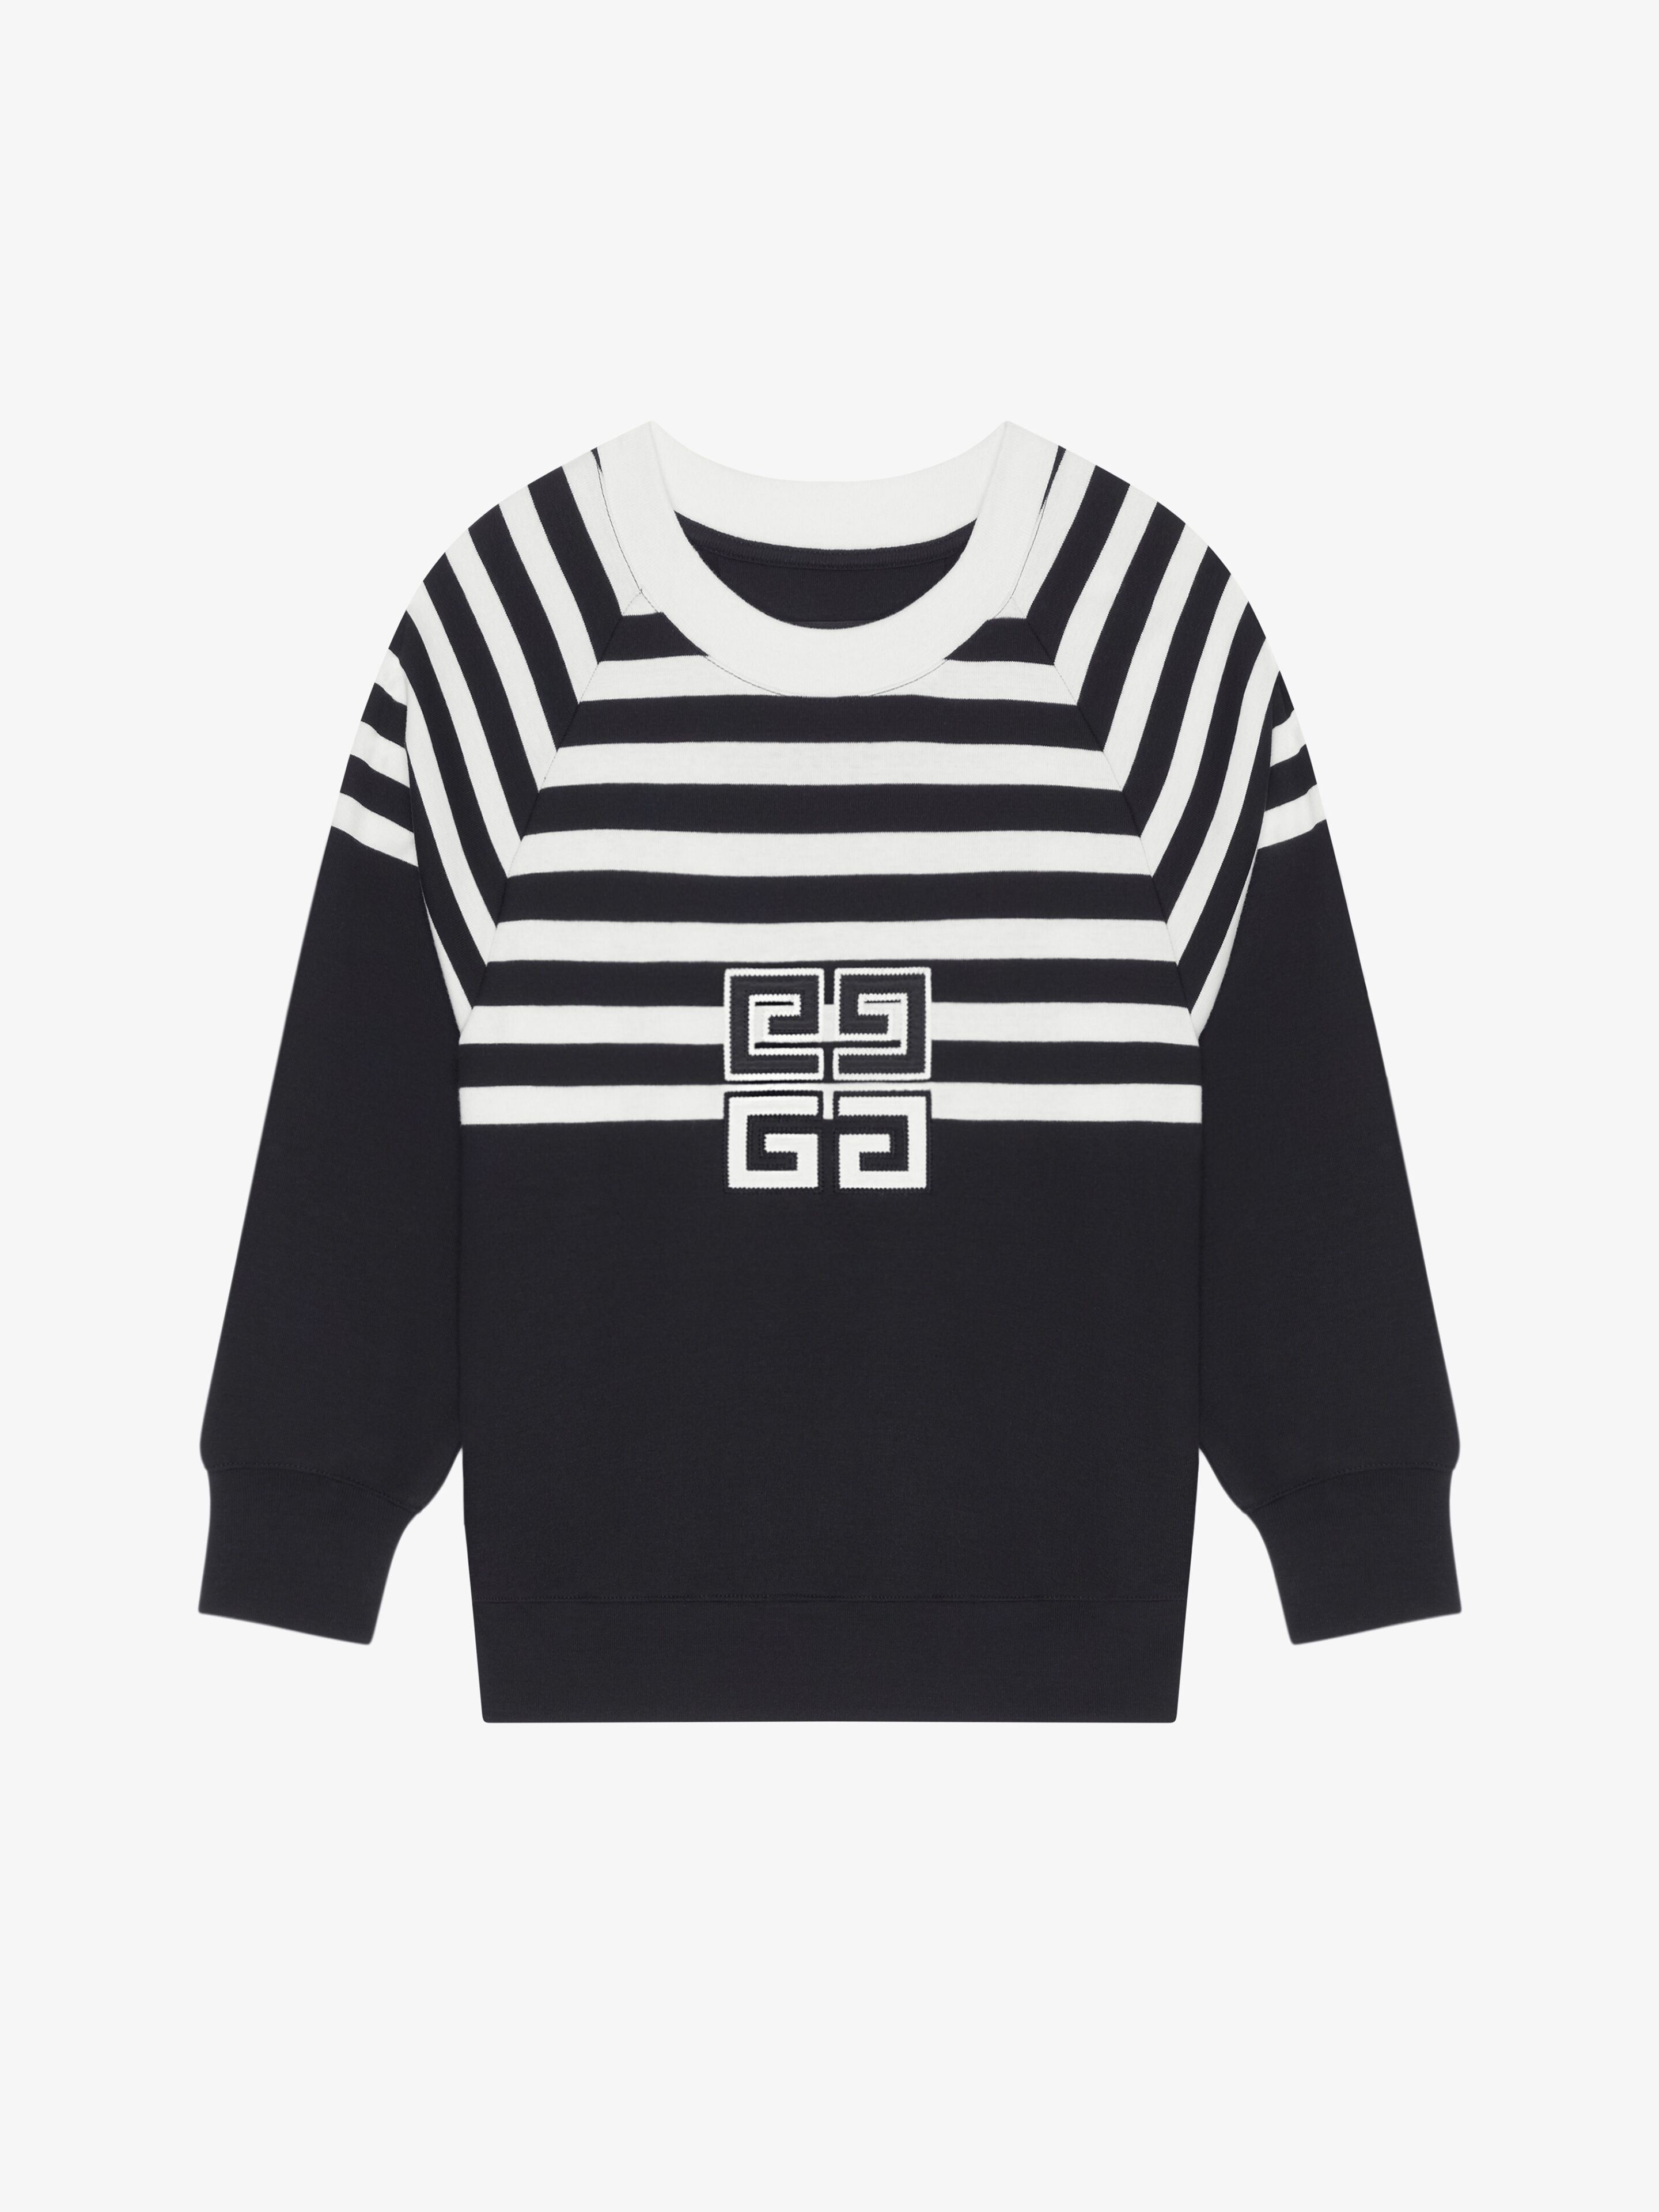 Givenchy Women's 4g Sweatshirt In Jersey With Stripes In Black White